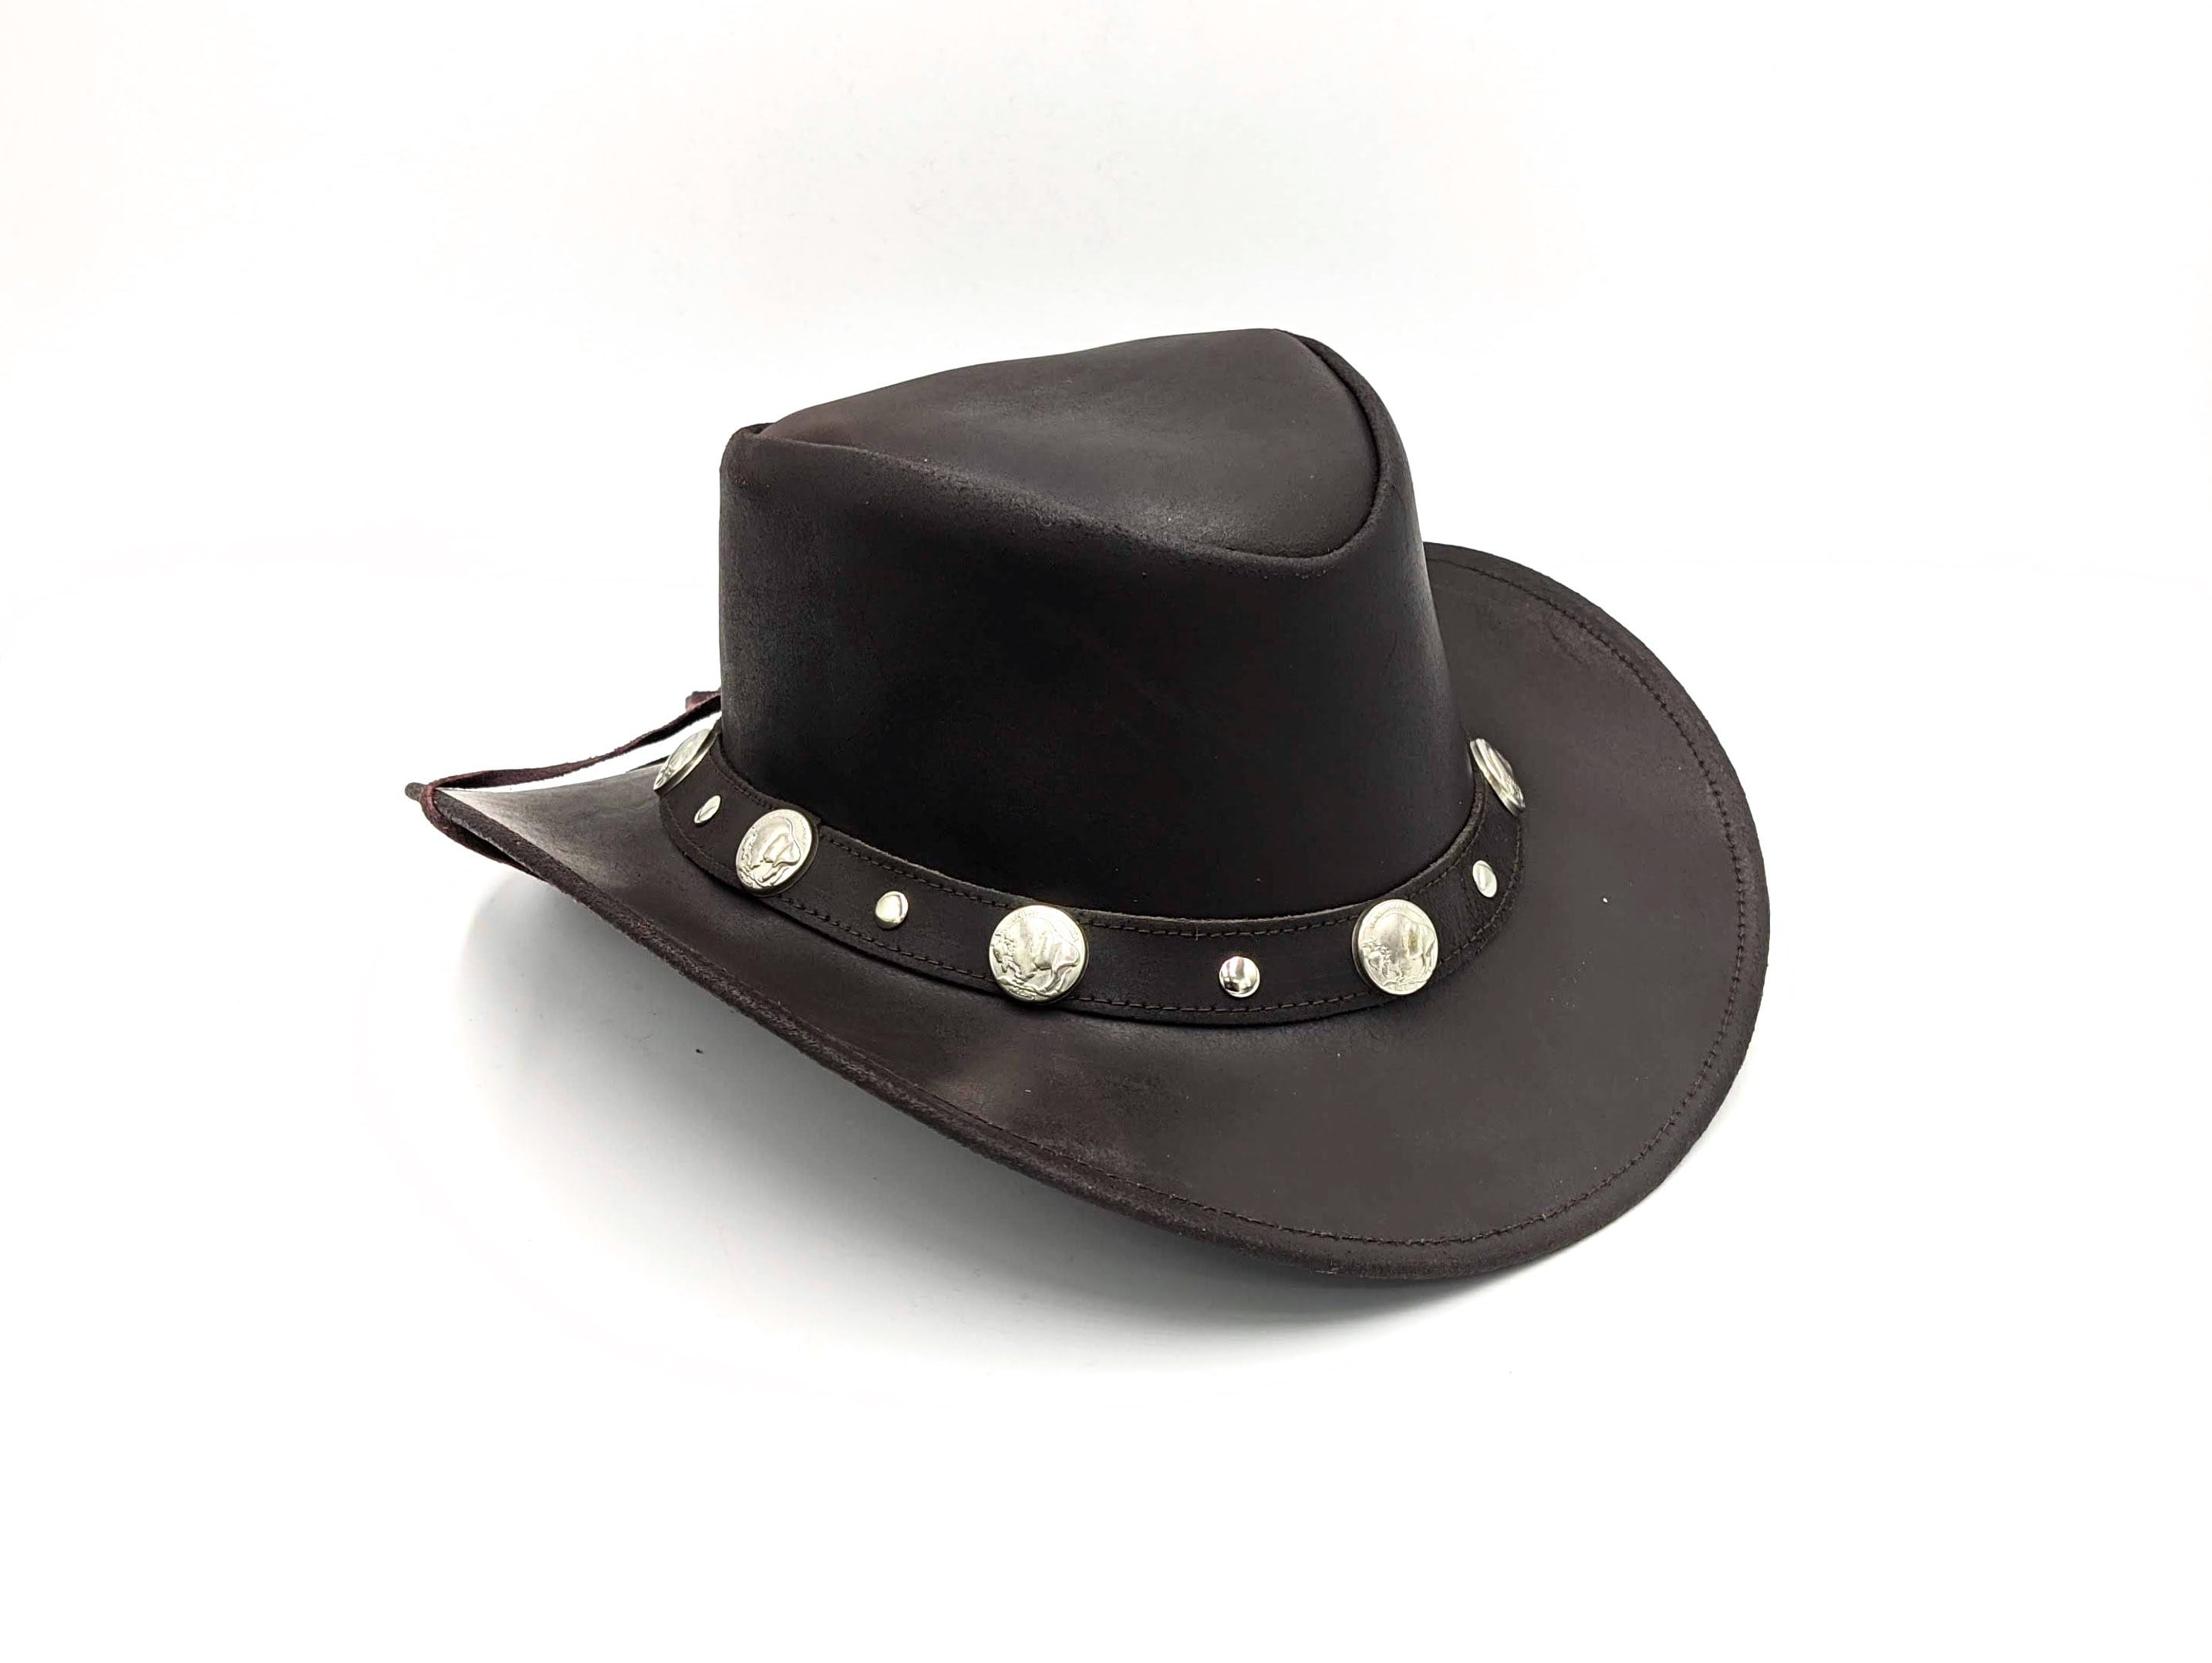 Shapeable Outback hat Style Leather Cowboy Old Style hat for Men and Women Western Wide Brim Vintage 